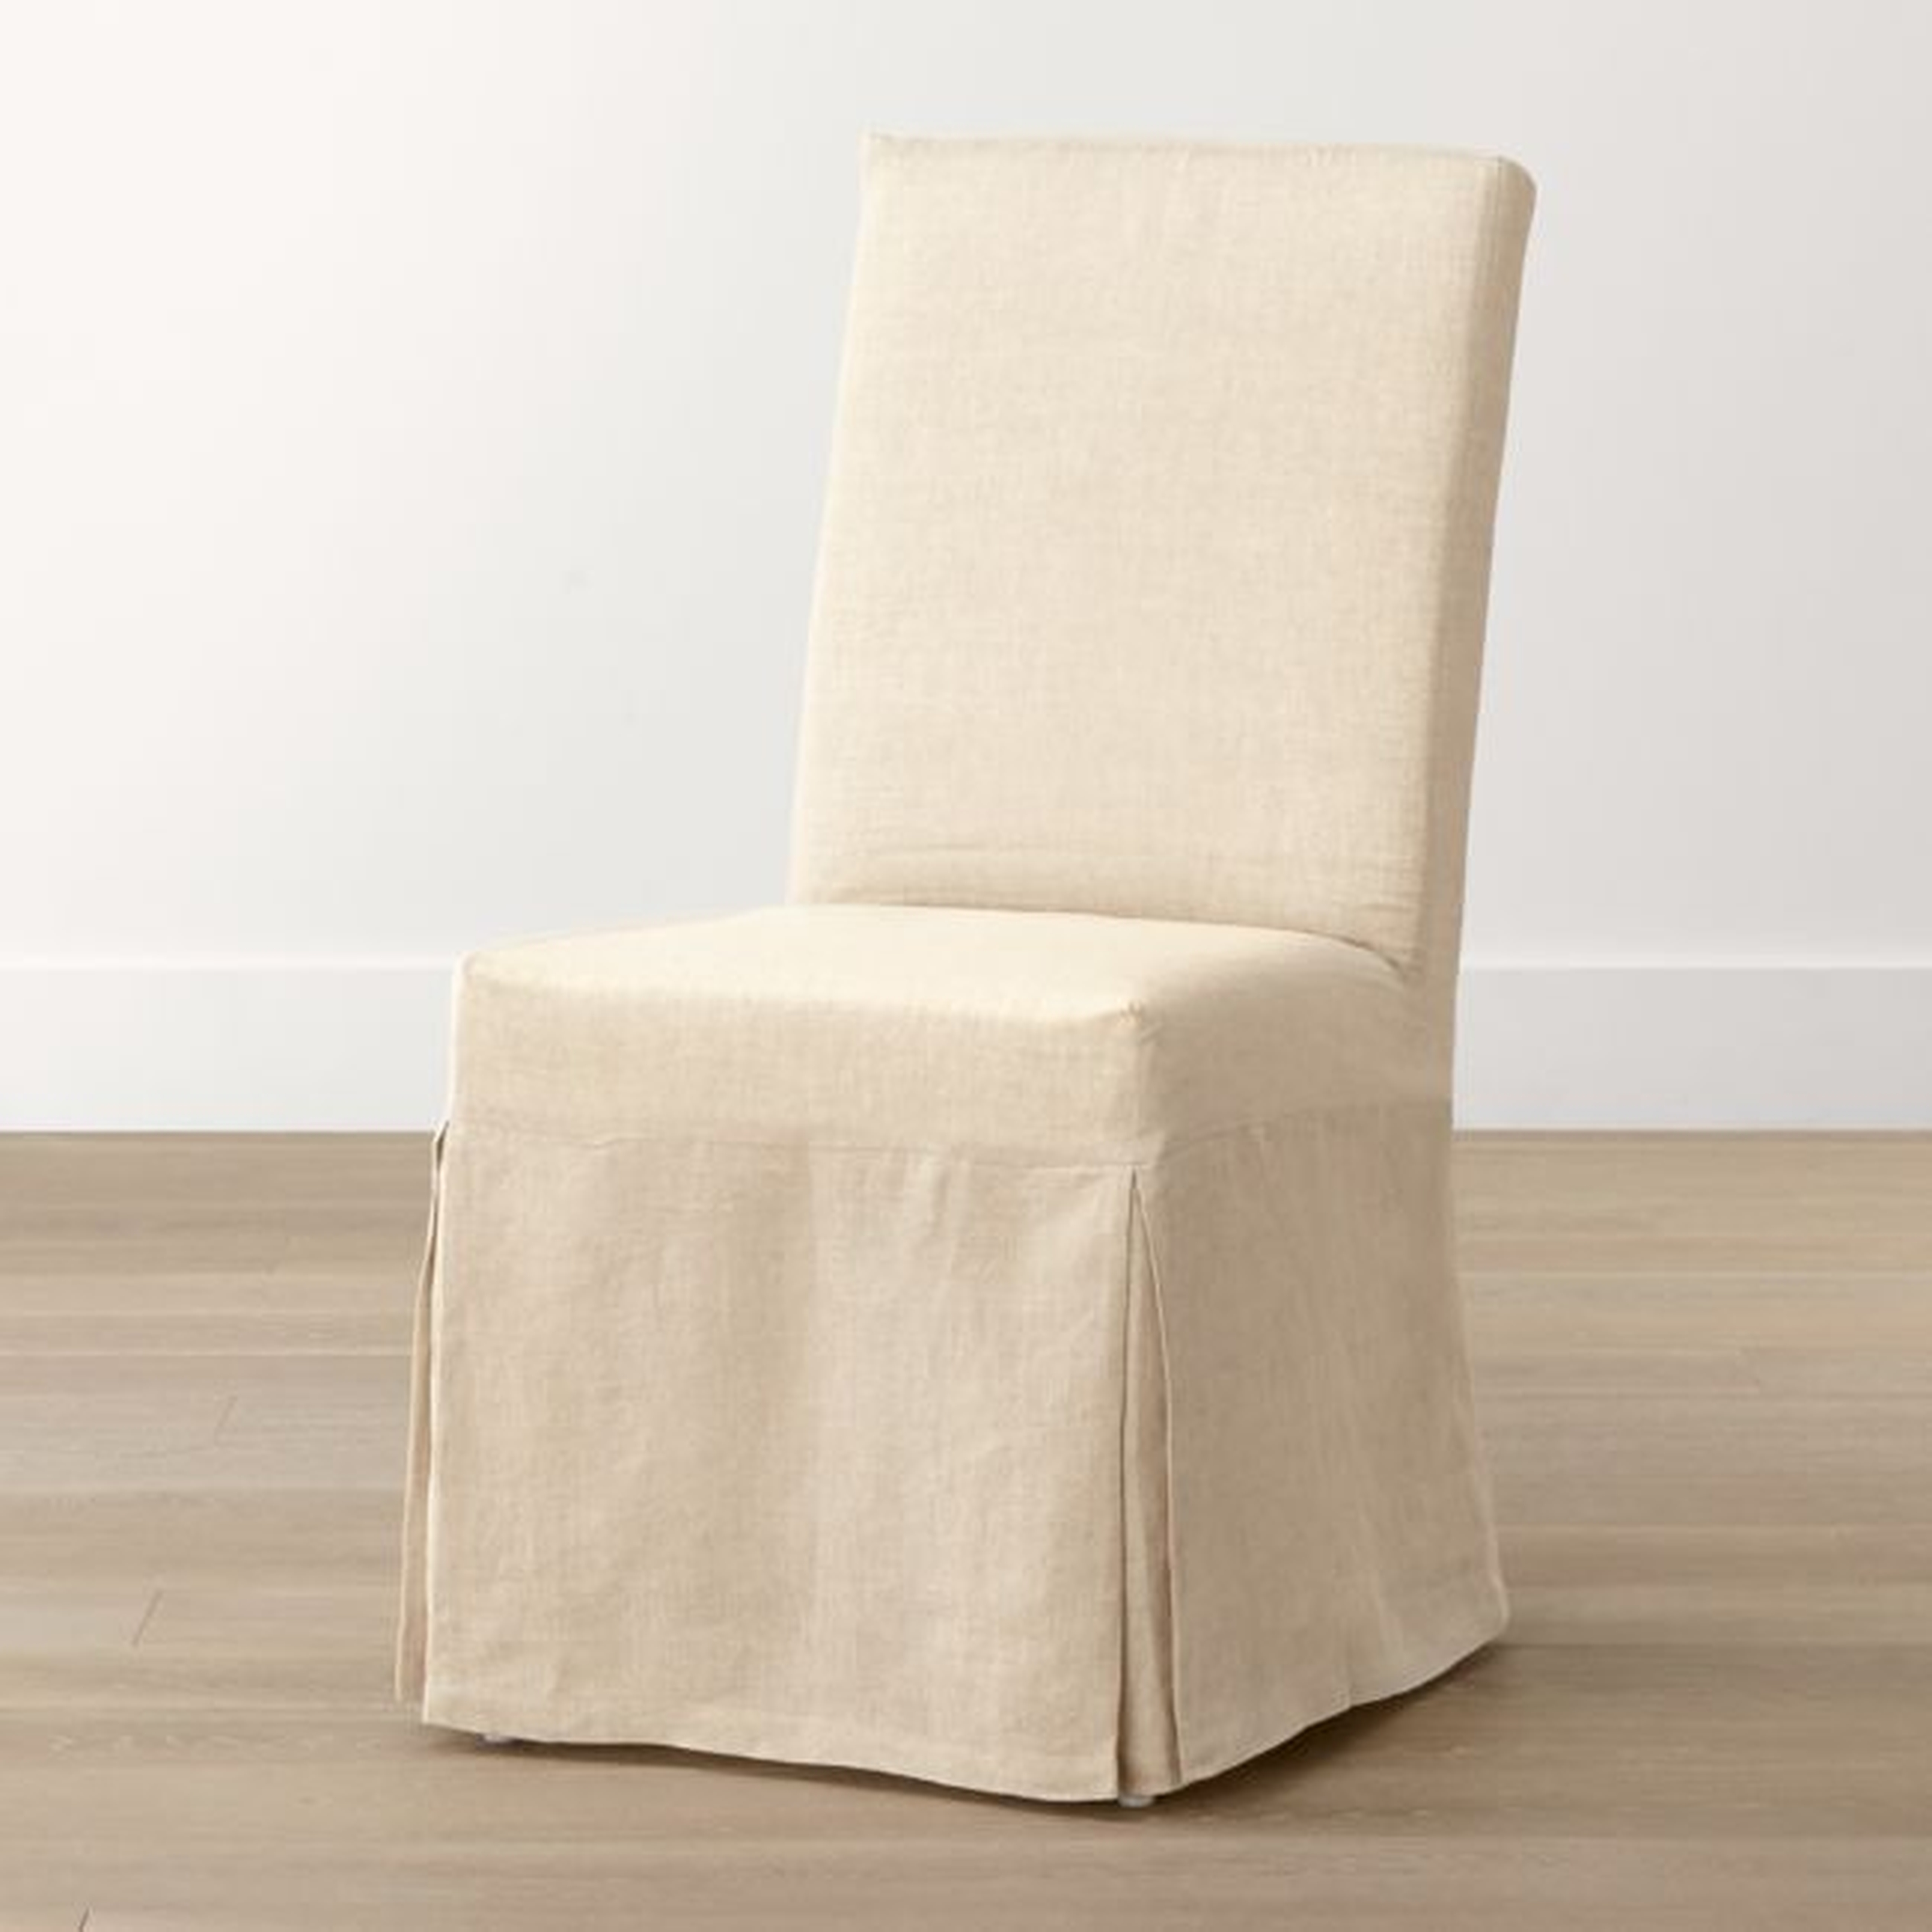 Slip Linen Slipcovered Dining Chair - Crate and Barrel